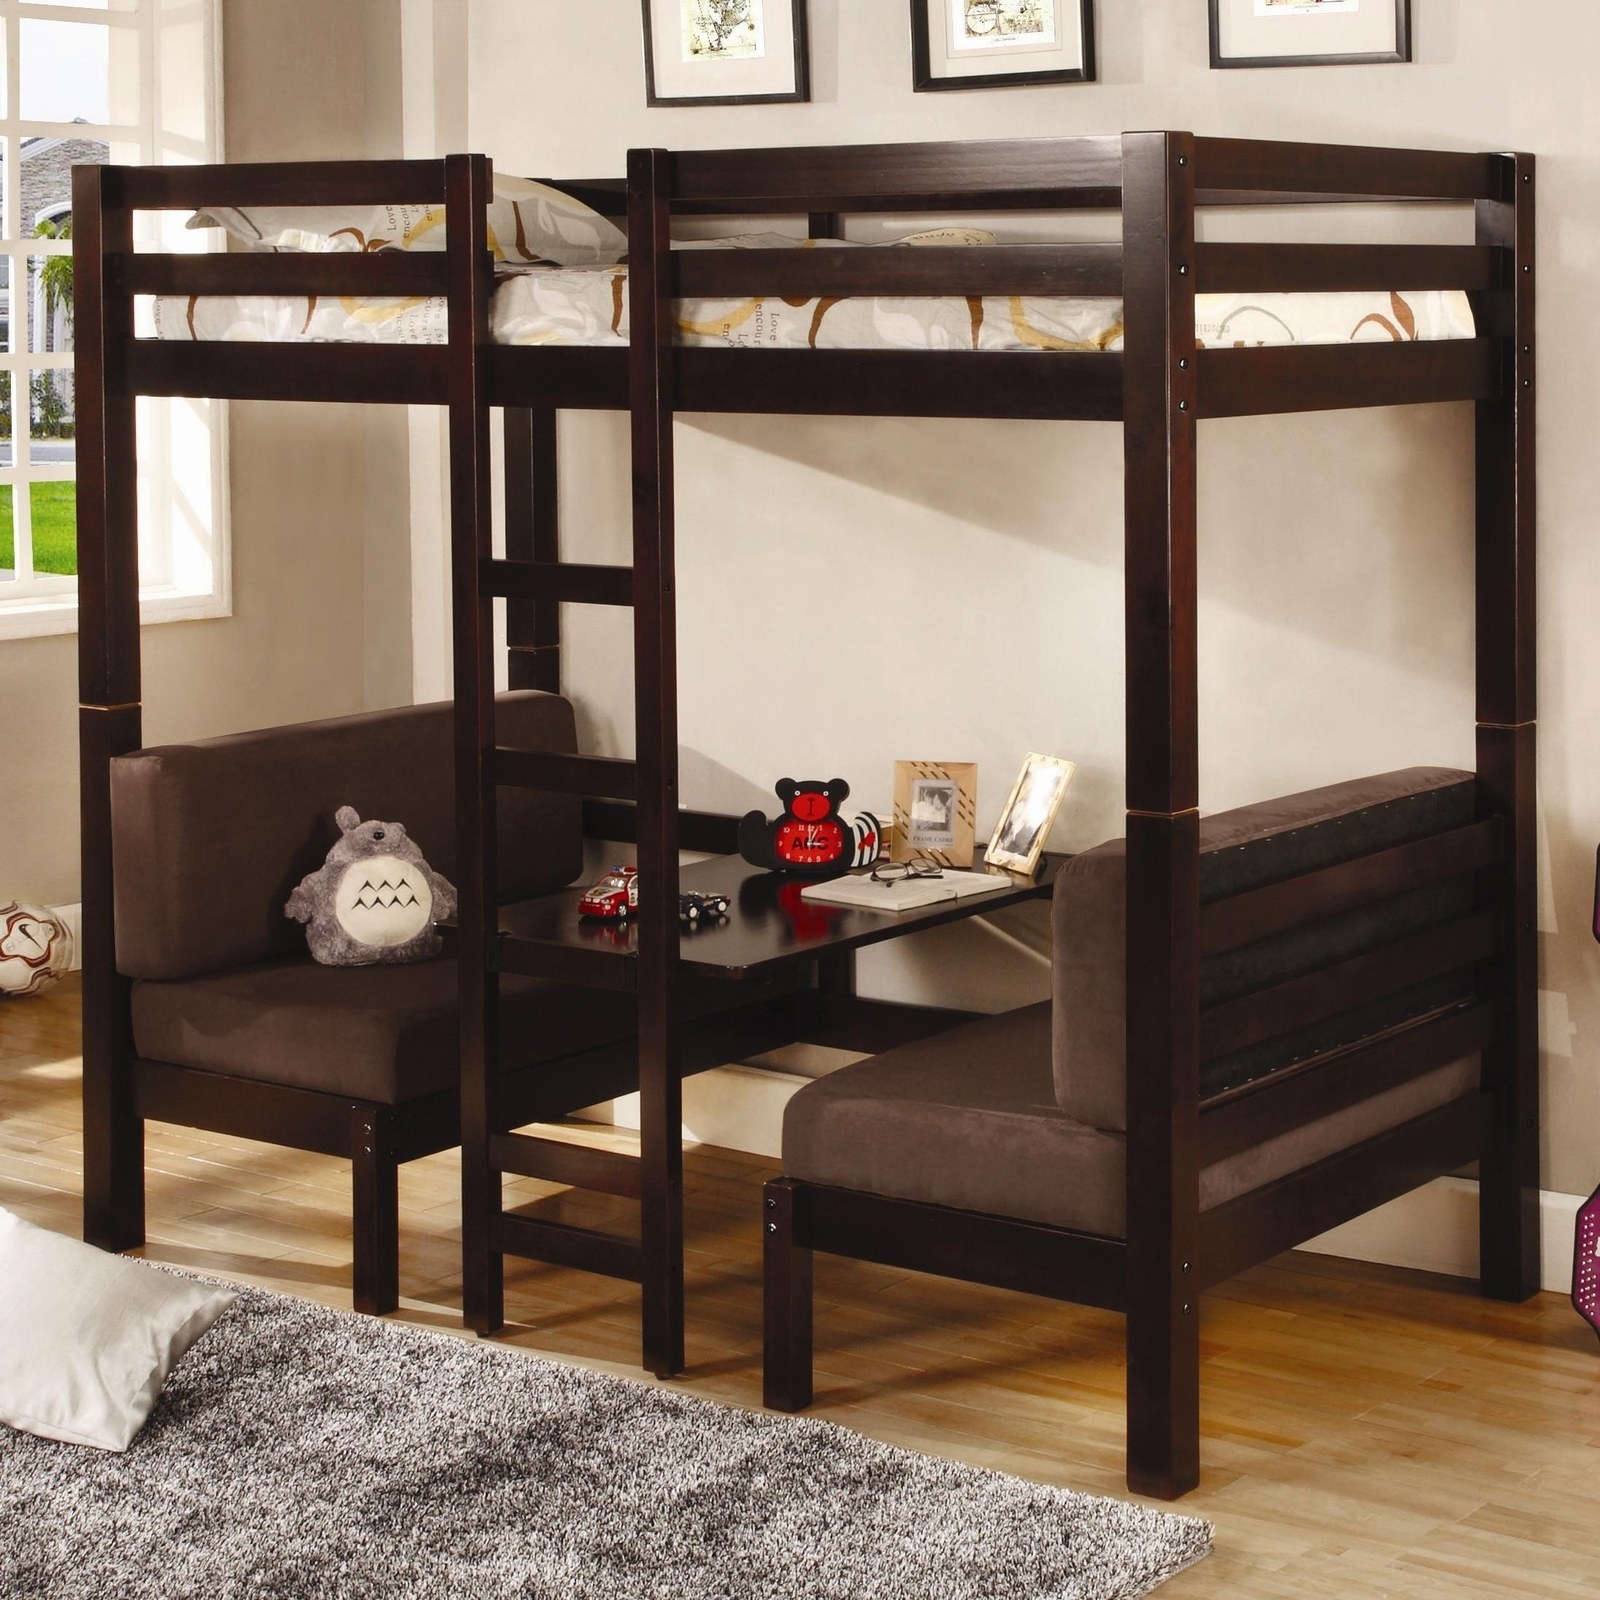 17 Loft Beds That Ll Save You So Much Space, Best Space Saving Twin Loft Bed